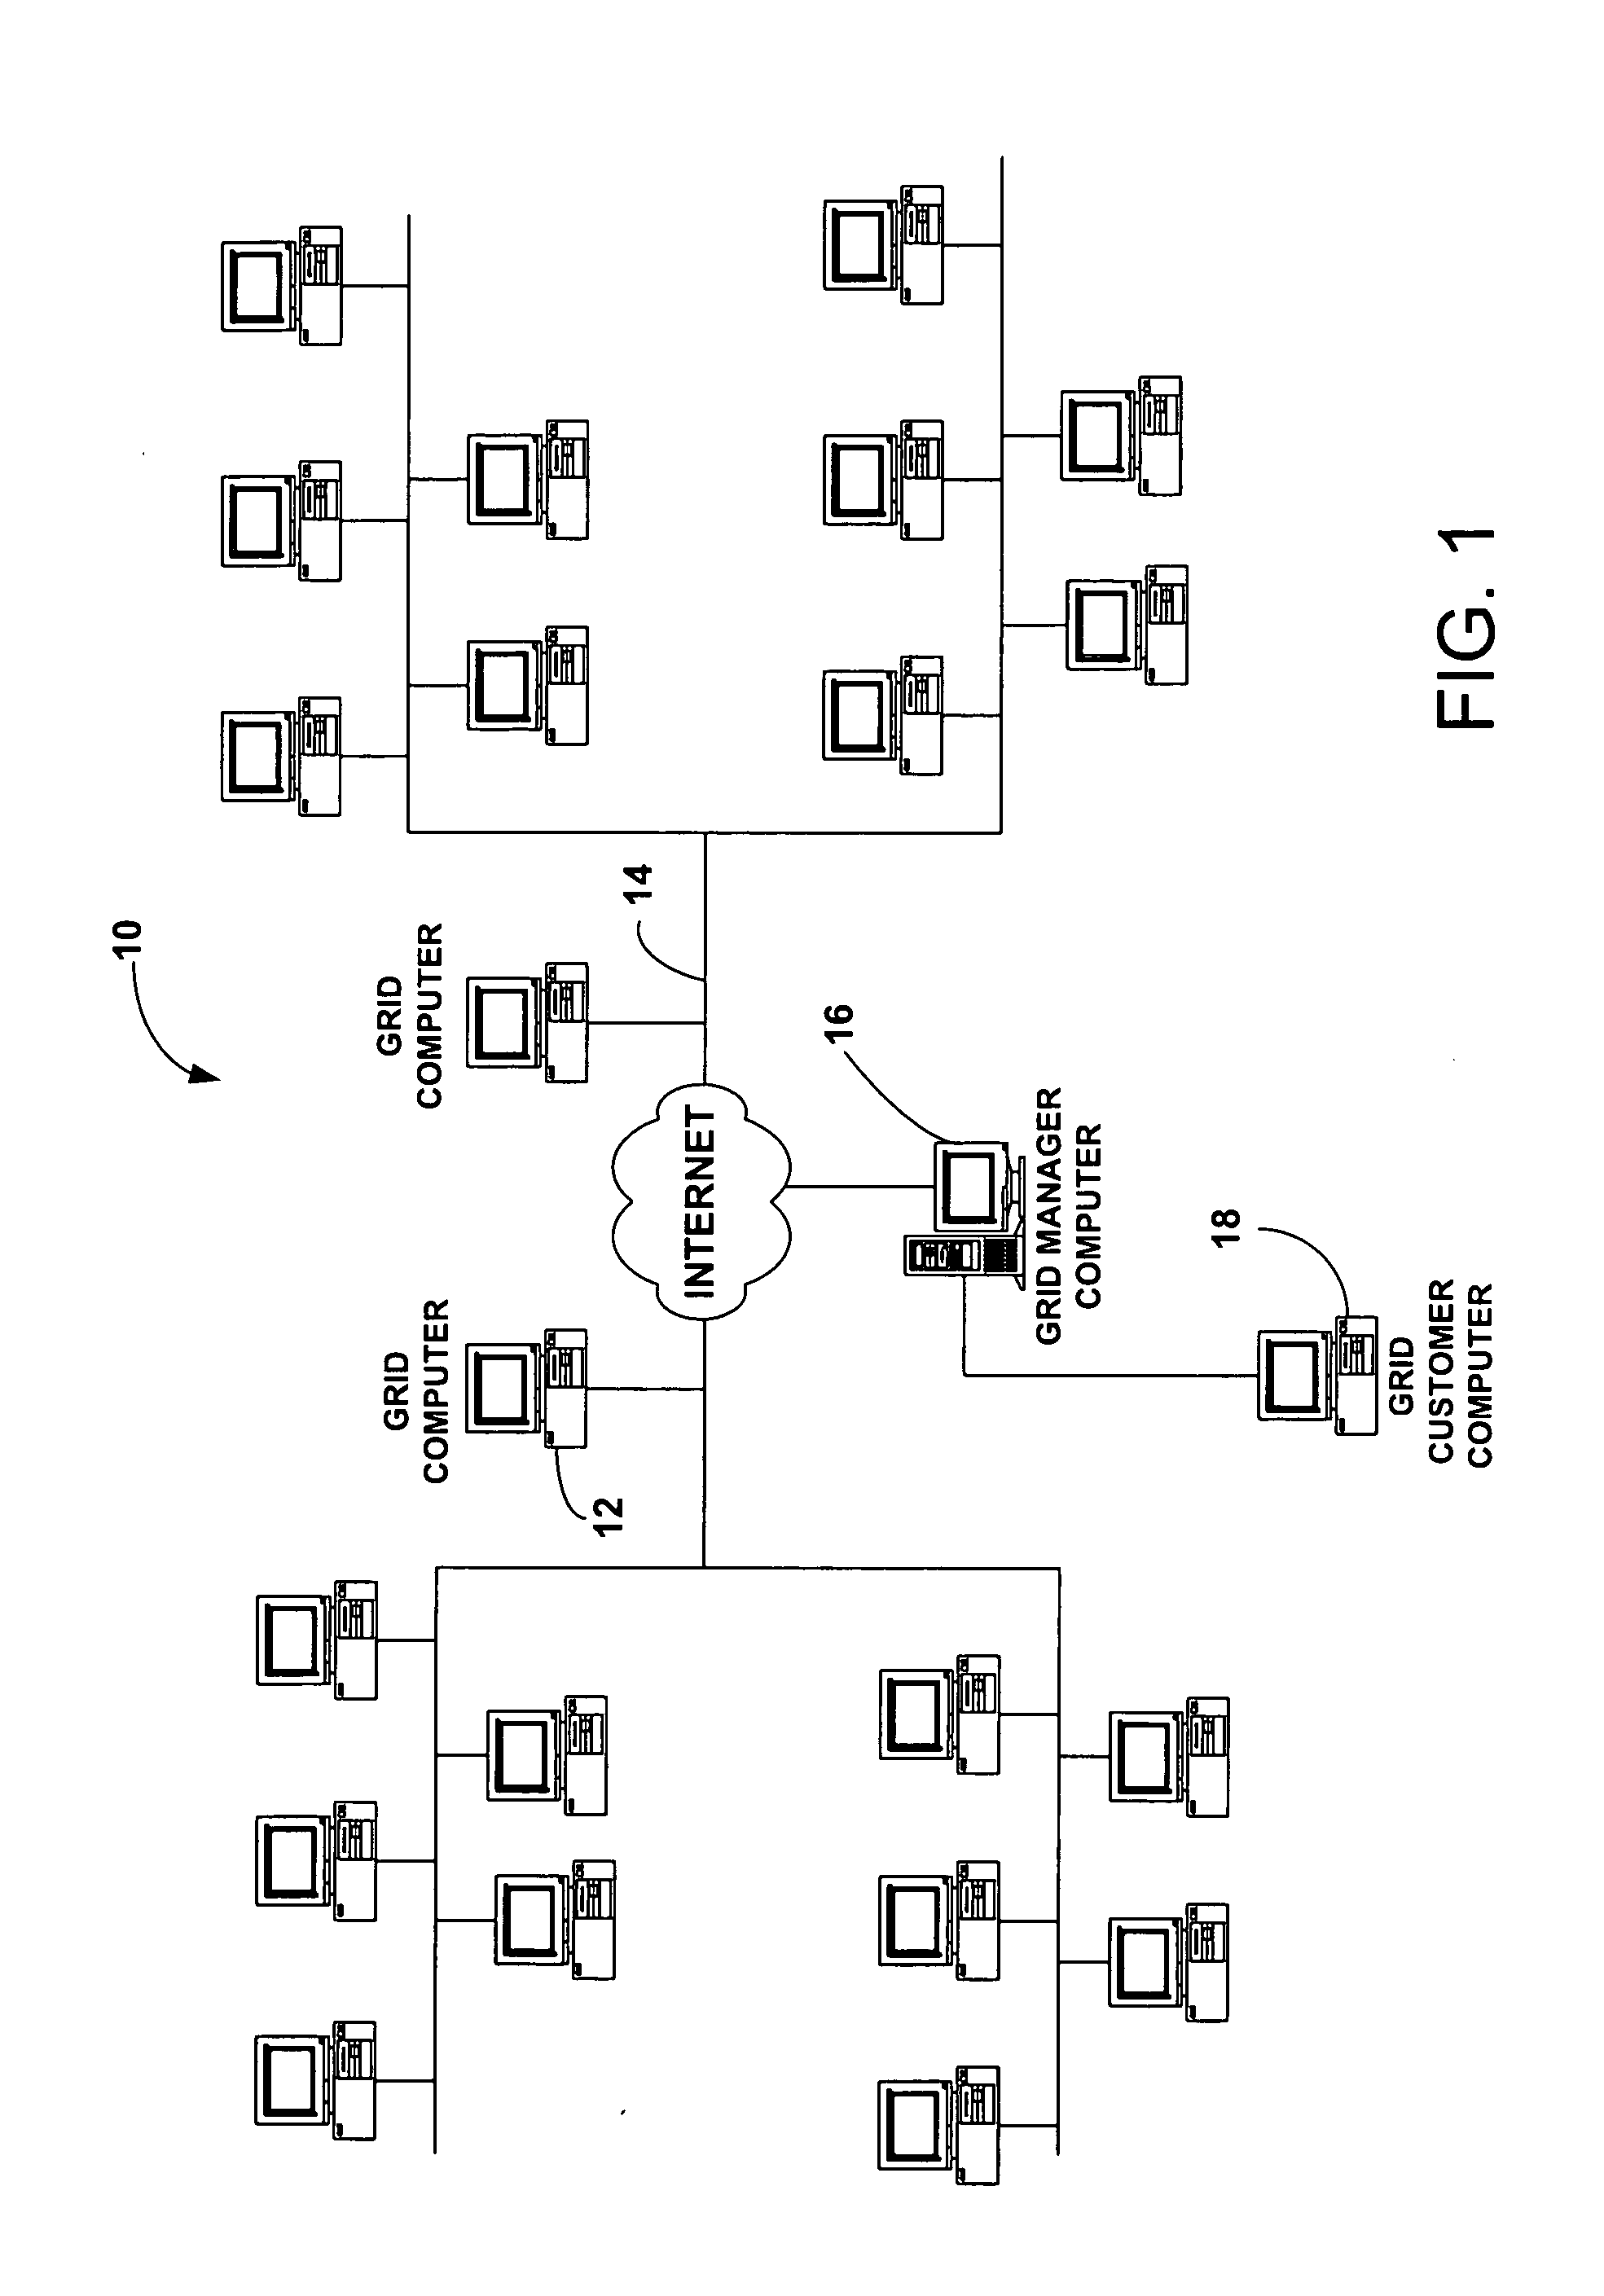 System for managing job performance and status reporting on a computing grid